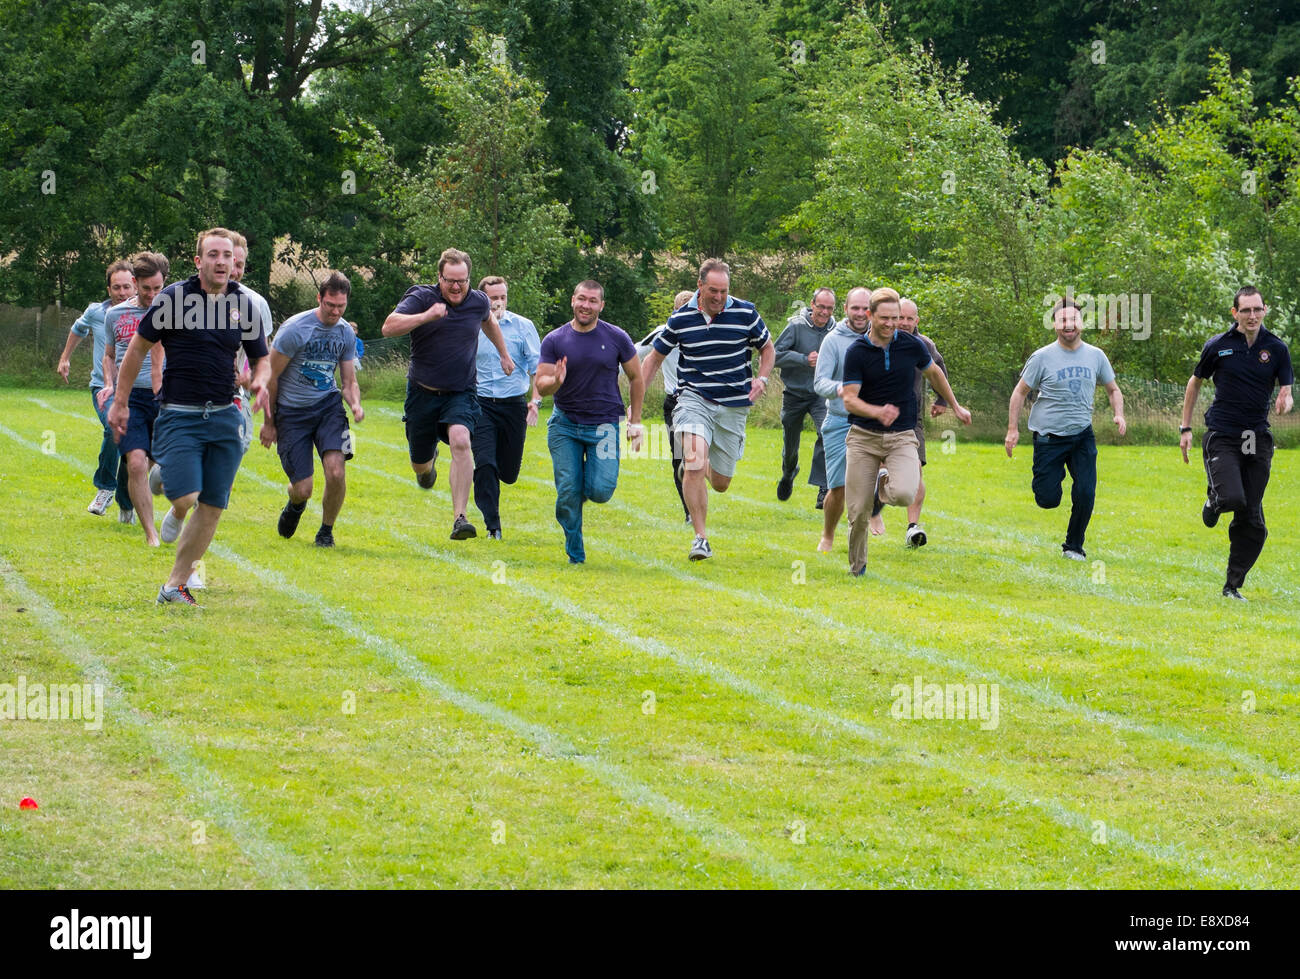 Dads competing in a parents race at a nursery school sports day Shropshire England Stock Photo